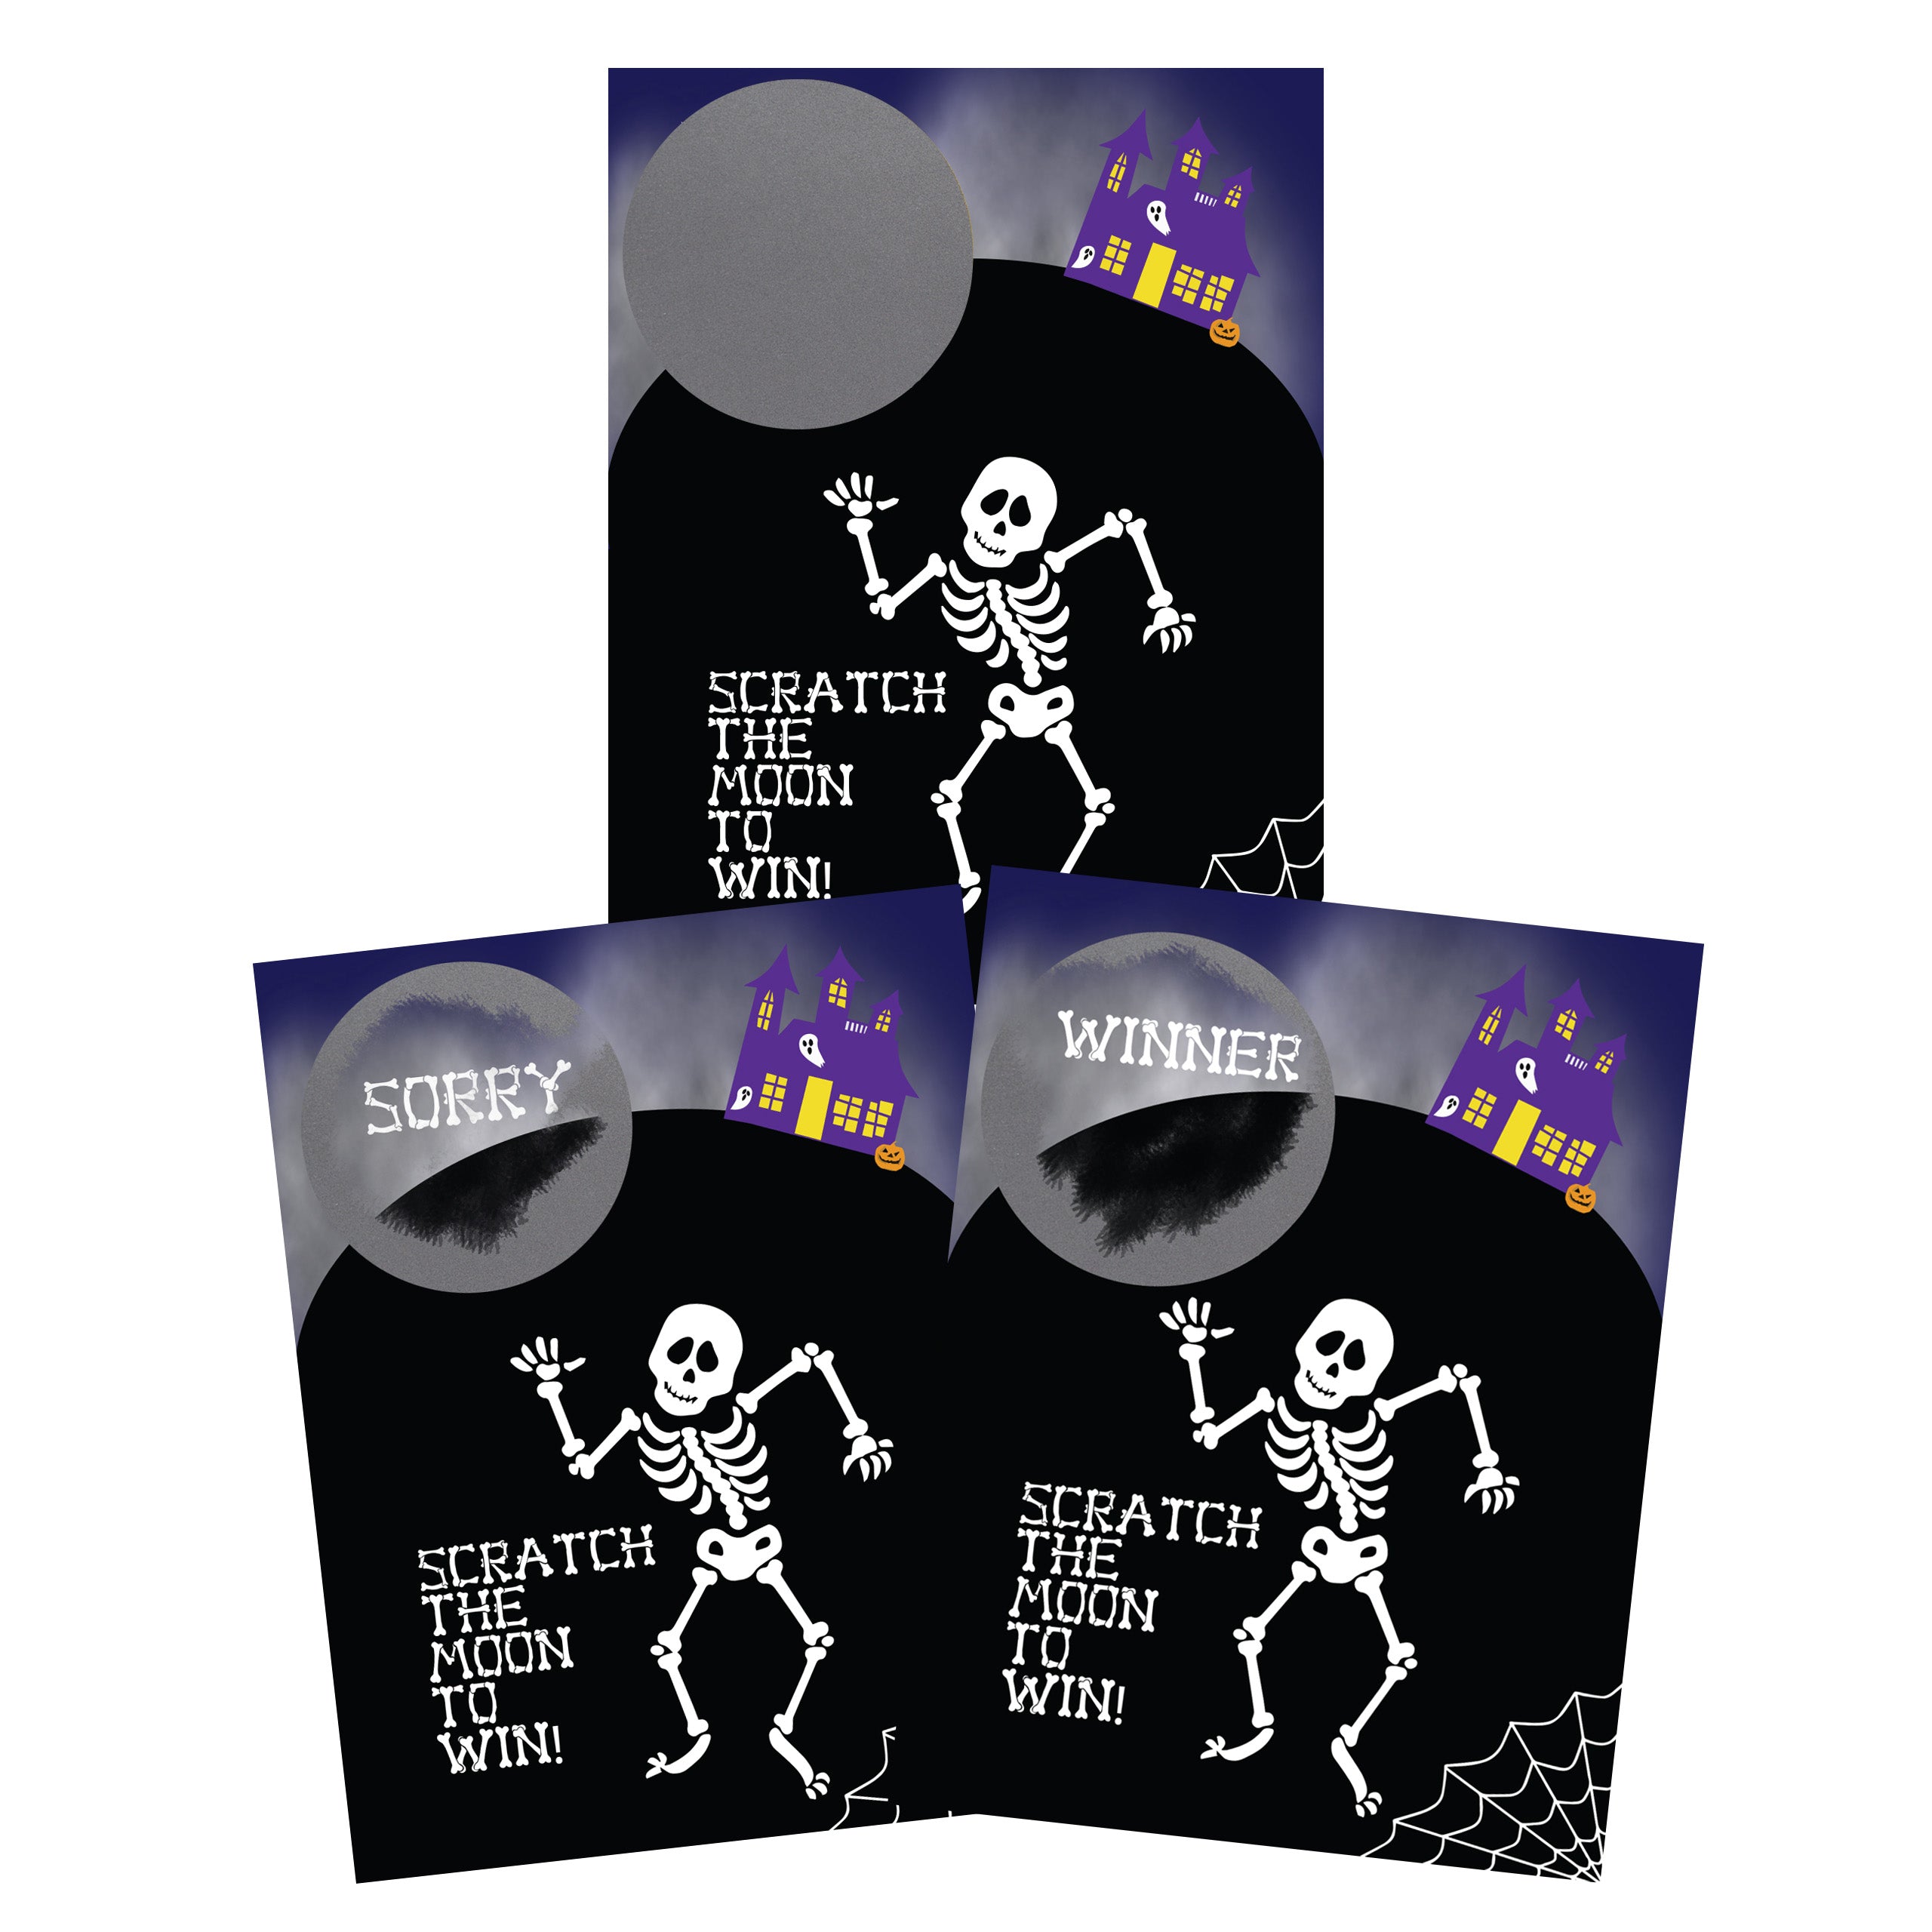 Halloween Spooky Skeleton Scratch Off Game 26 Pack - 2 Winning and 24 Non-Winning Cards